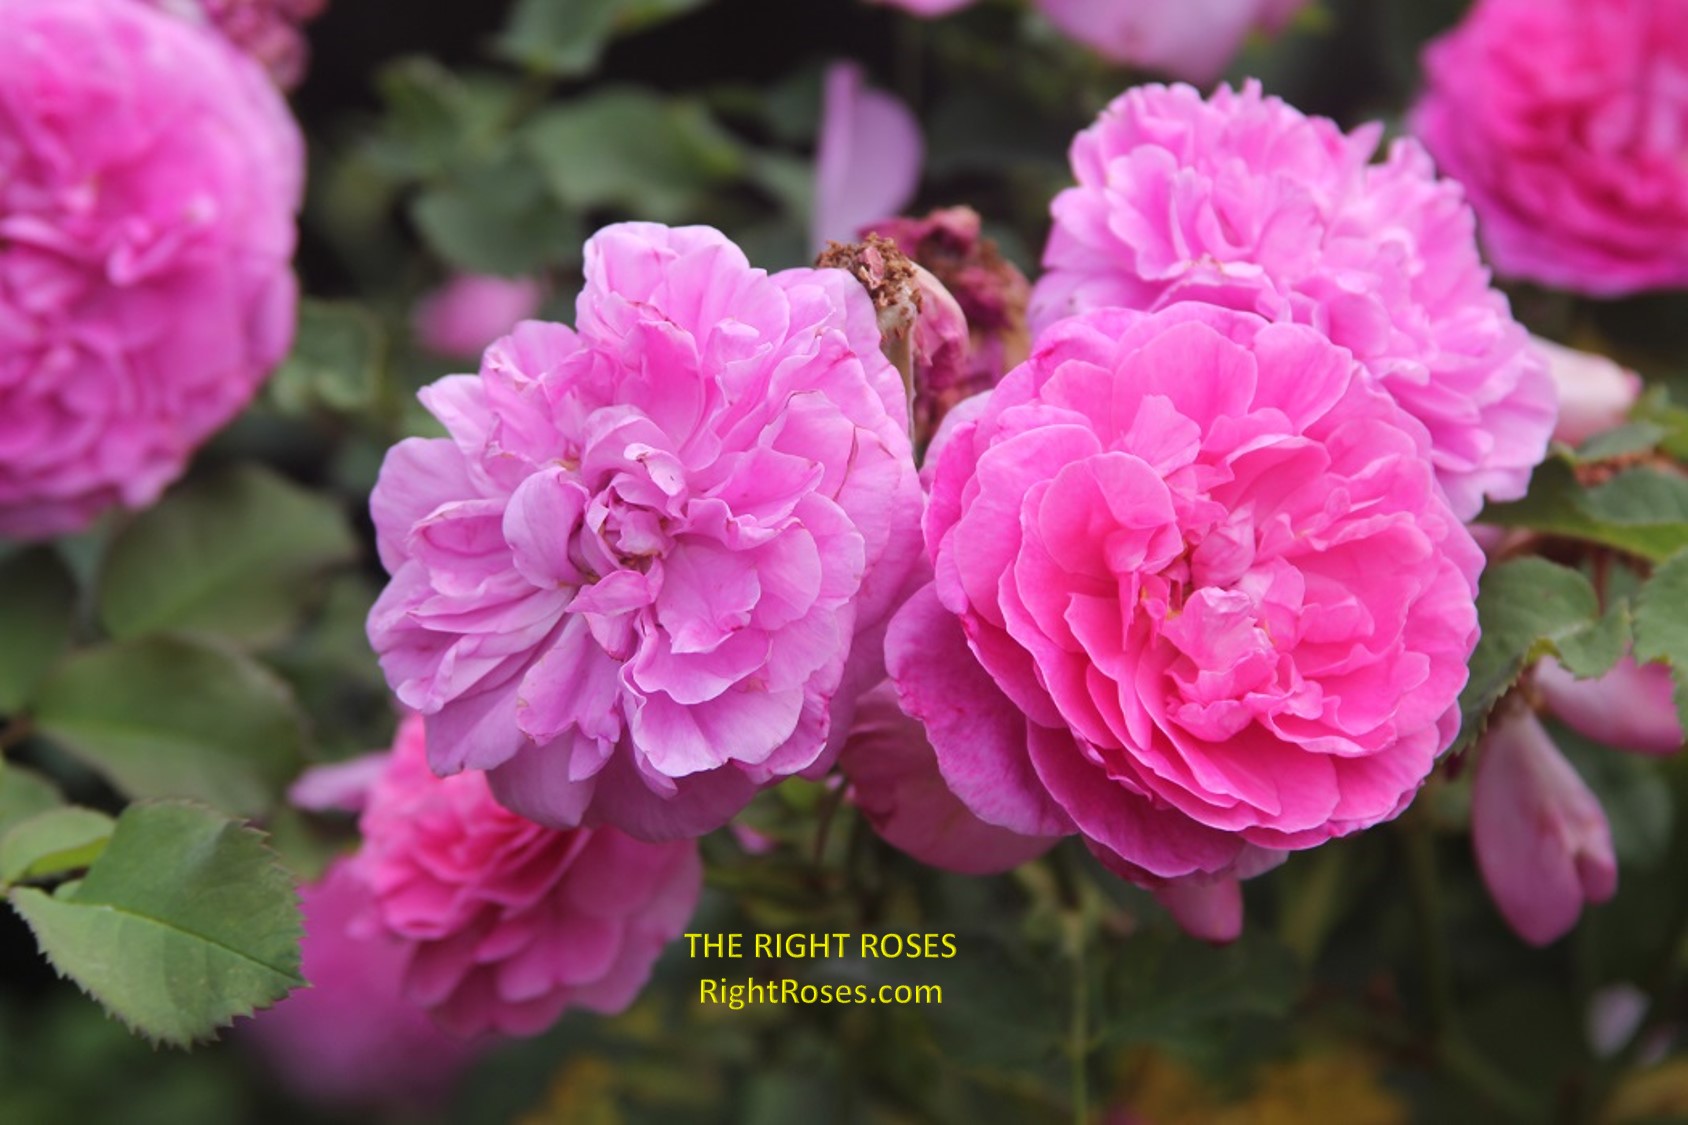 England's rose rose review the right roses score best top garden store david austin english roses rose products rose rating the right leap rose food fertilizer